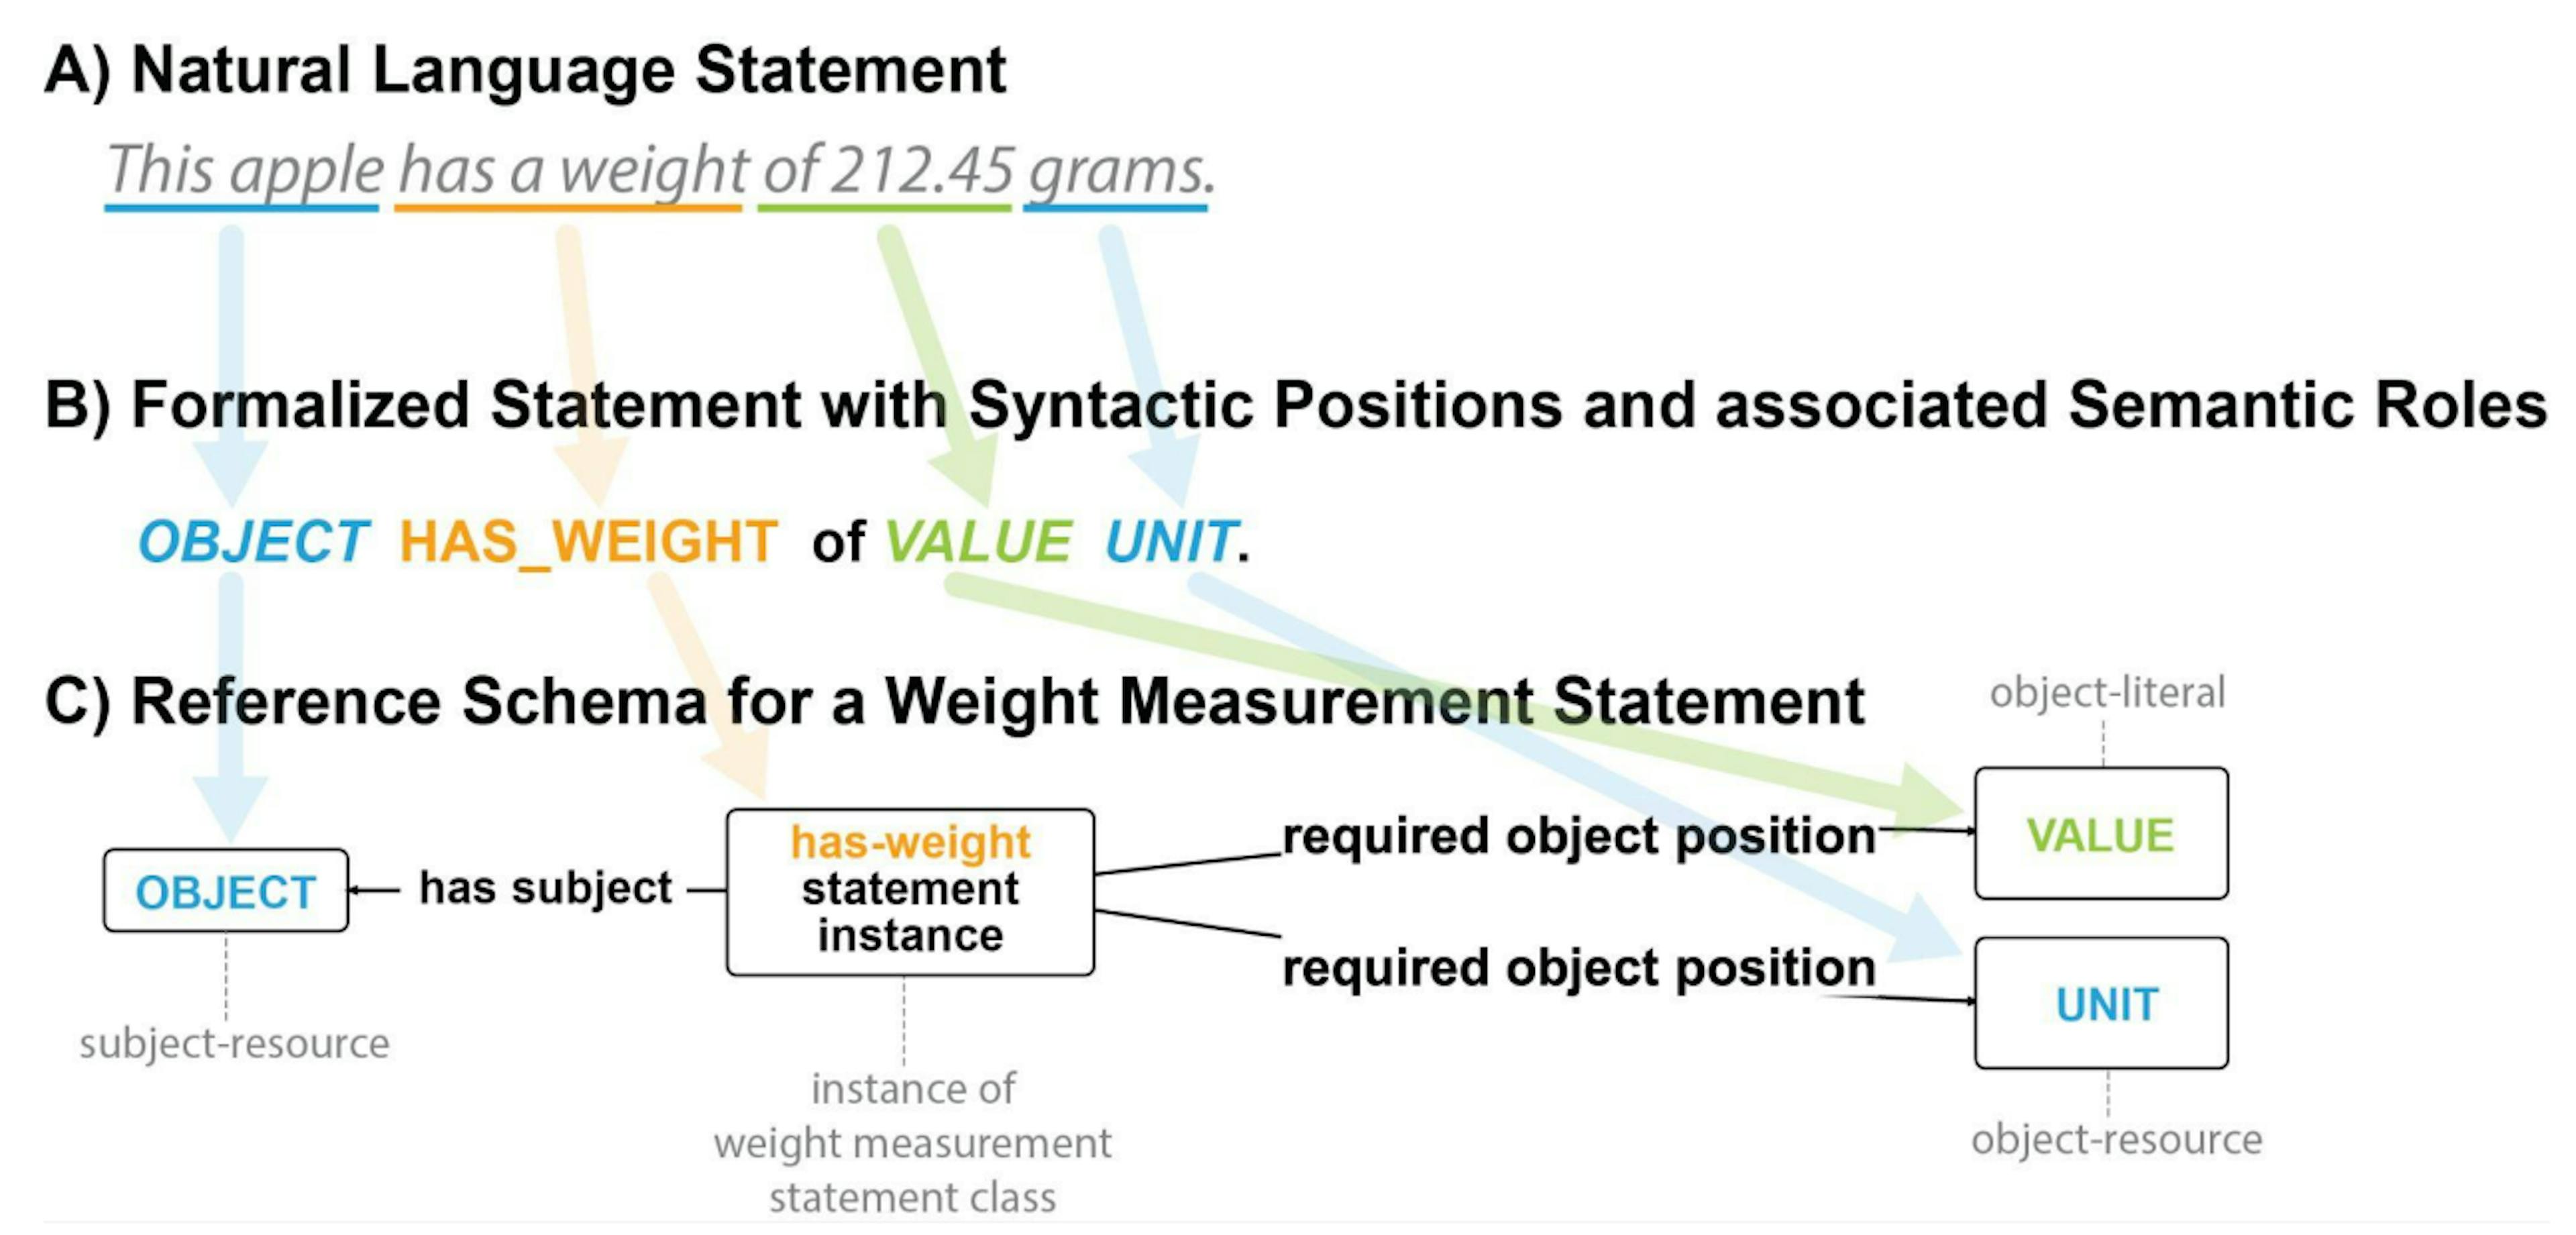 Figure 5: From the structure of a natural language statement to the structure of a reference schema. A) A natural language statement with the predicate has_a_weight. B) The corresponding formalized statement, with the syntactic positions and their associated semantic roles highlighted in color. C) The reference schema for the weight measurement statement, following the Rosetta modeling paradigm.